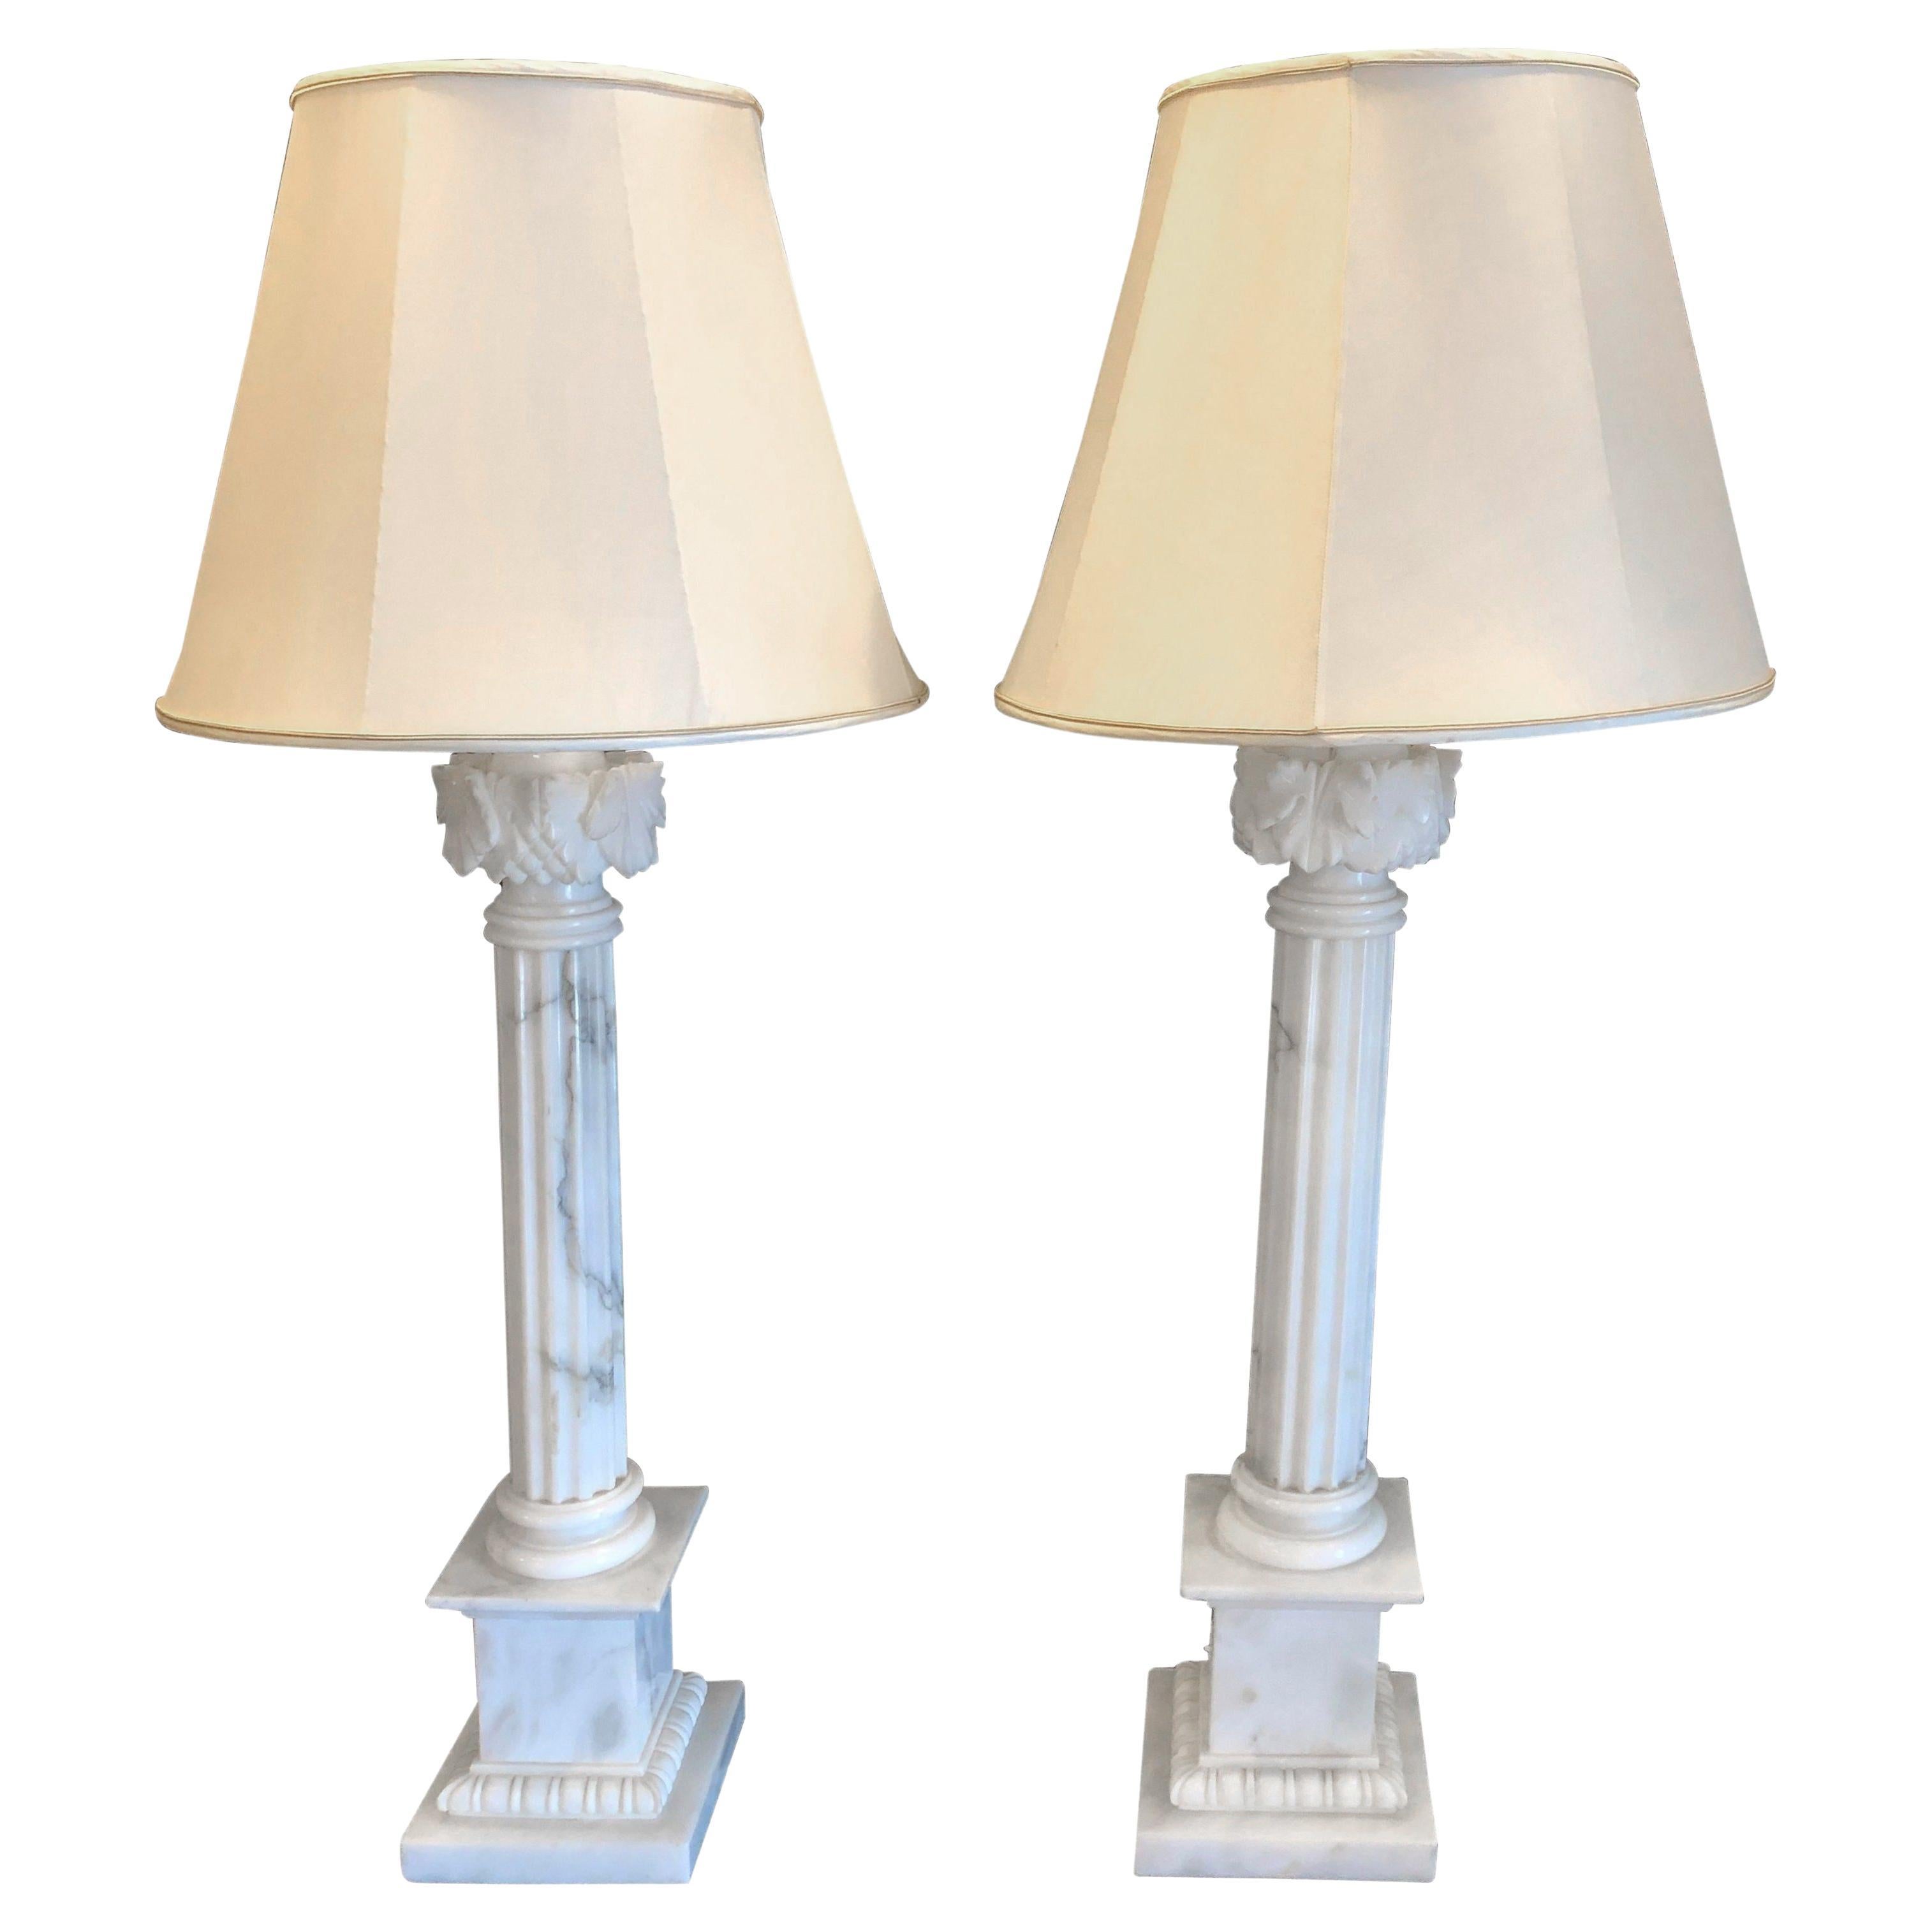 Pair of White and Grey Veined Column Marble Table Lamps with Custom Shades For Sale